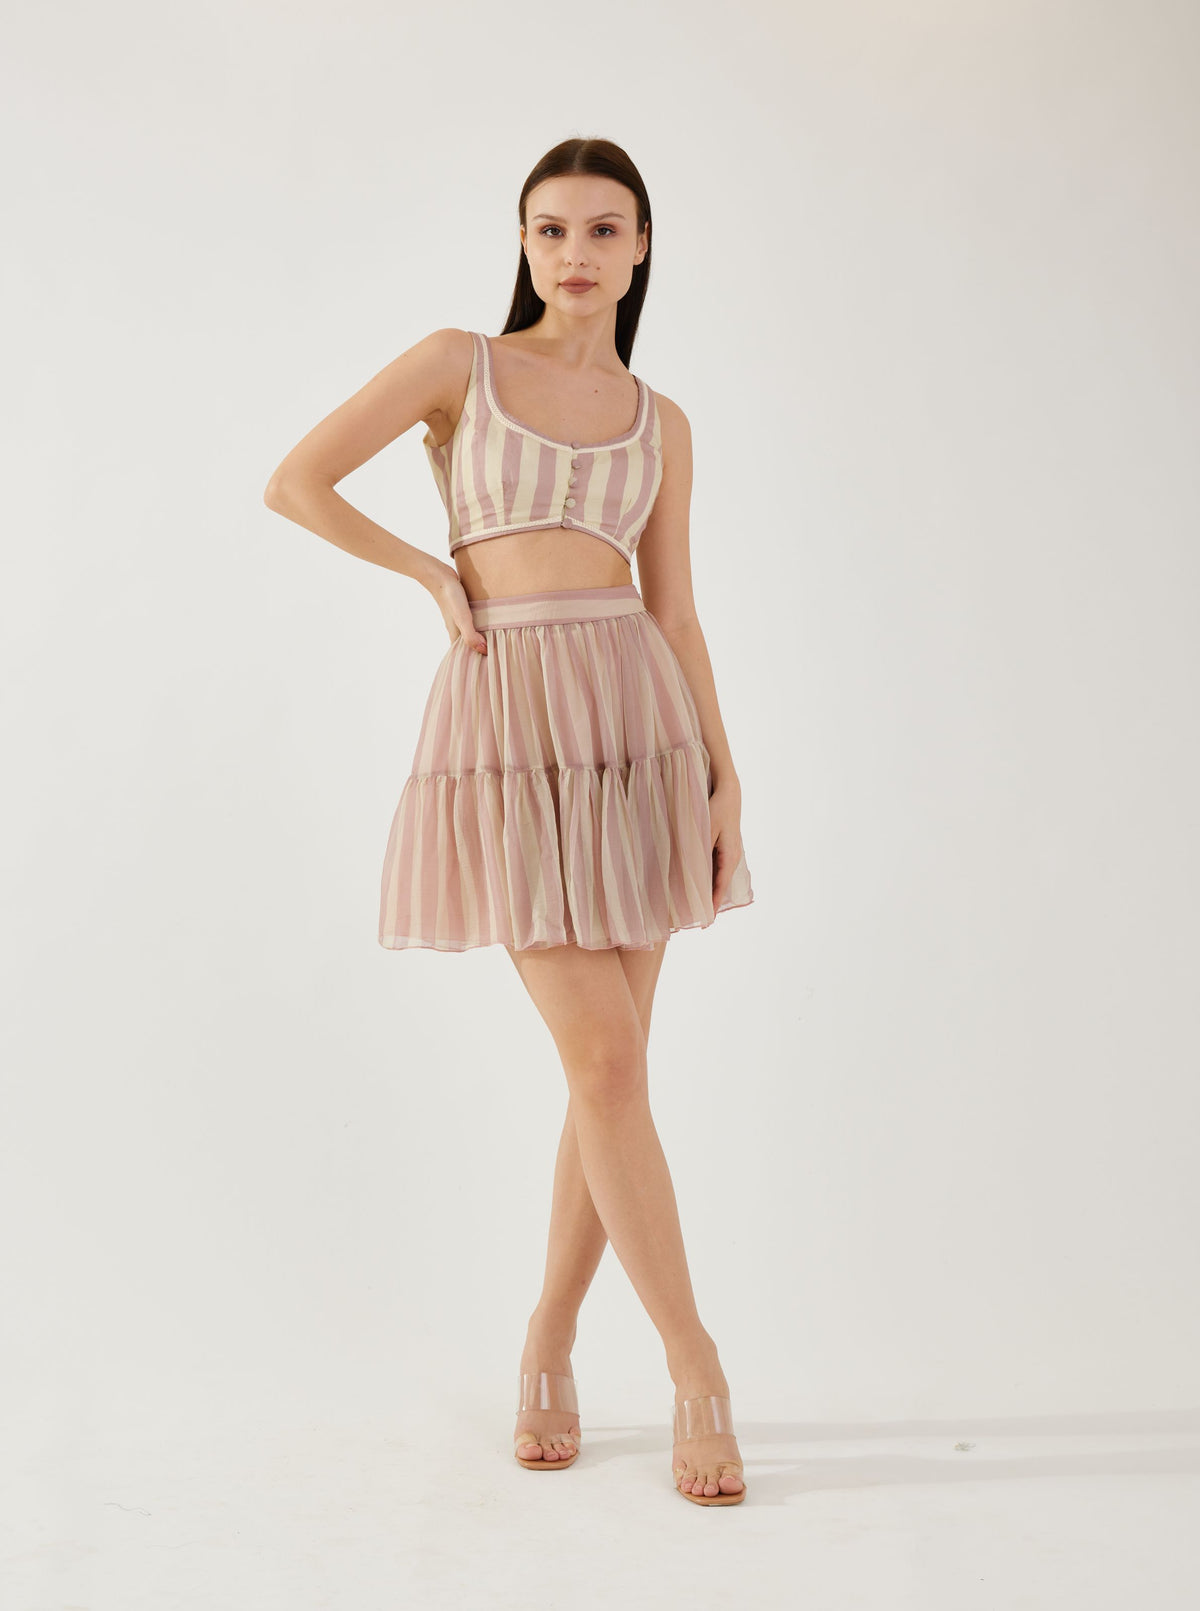 ROSE PINK AND CREAM STRIPE BUSTIER